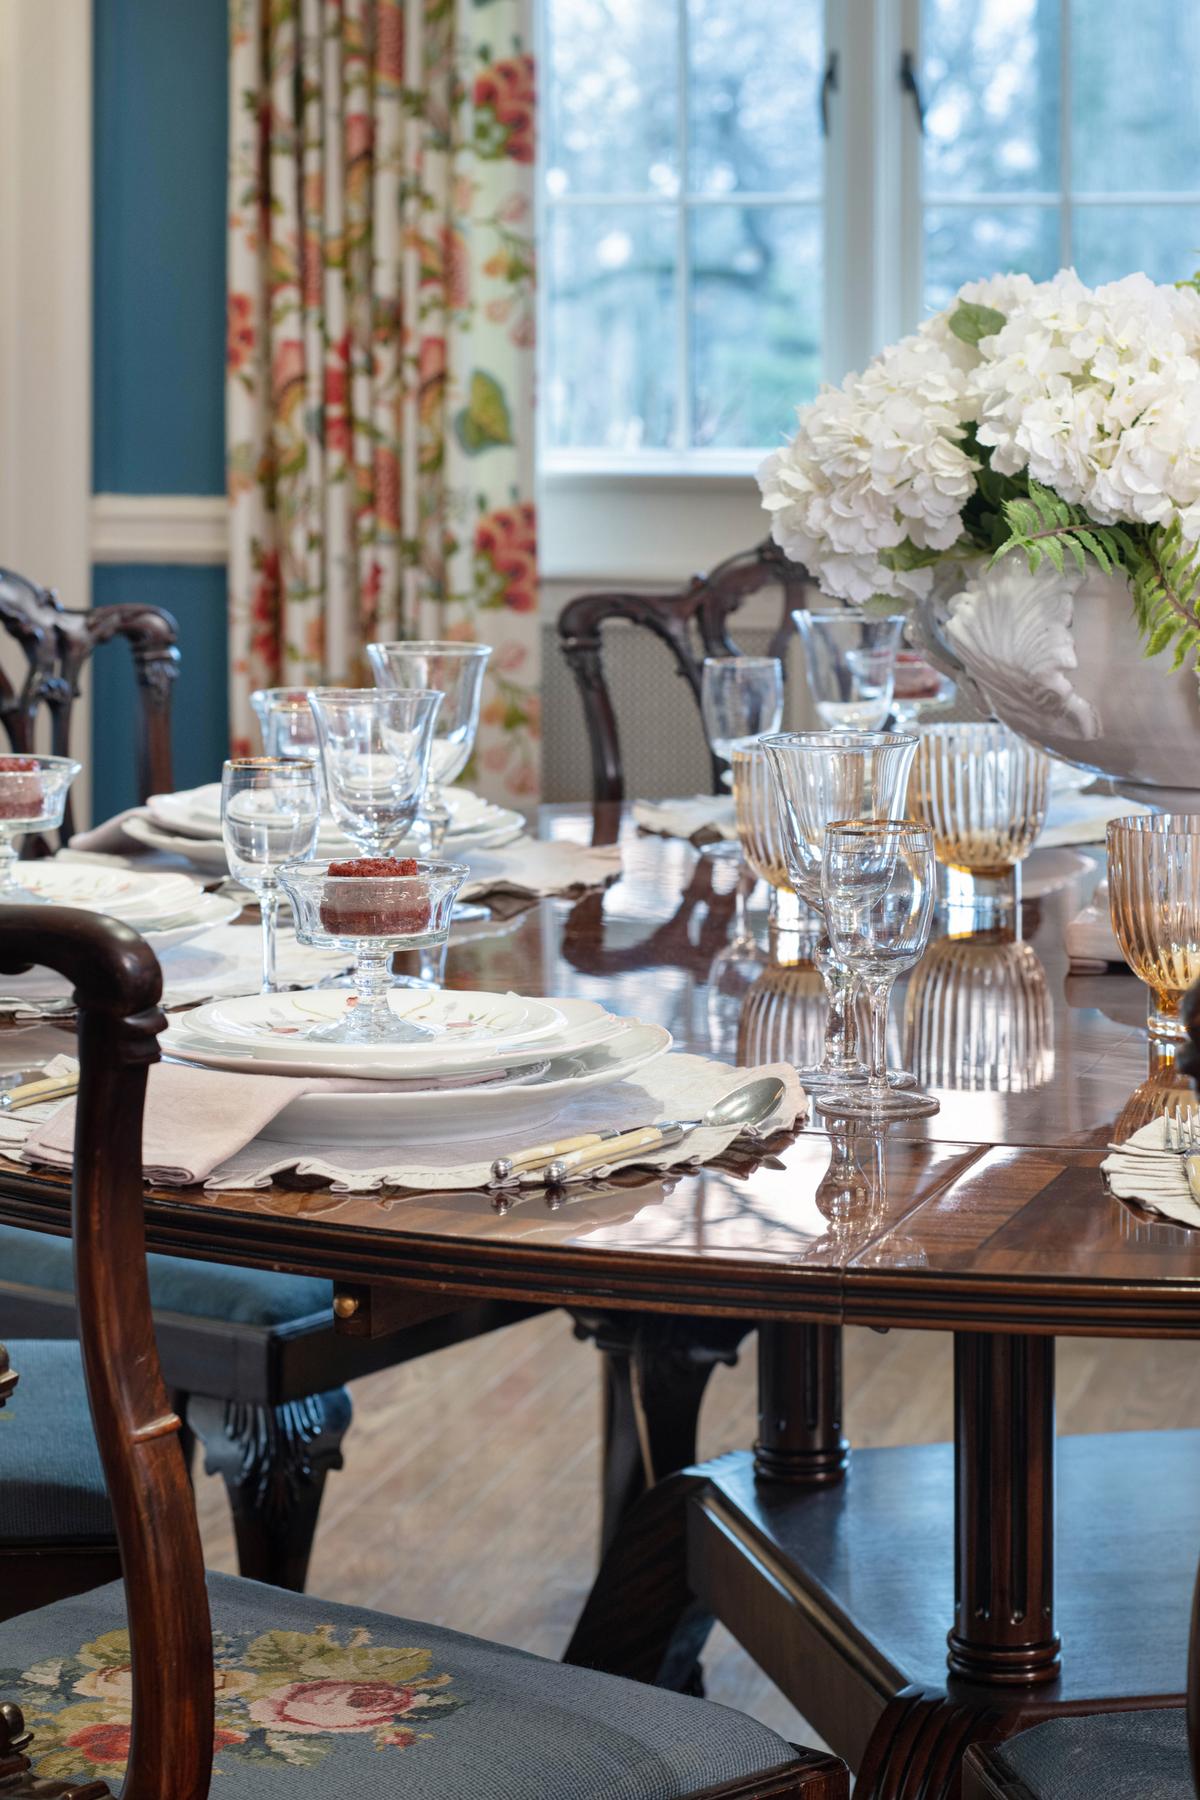 An enchanting neutral tabletop lets the beauty of the dining room take center stage. (Handout/TNS)